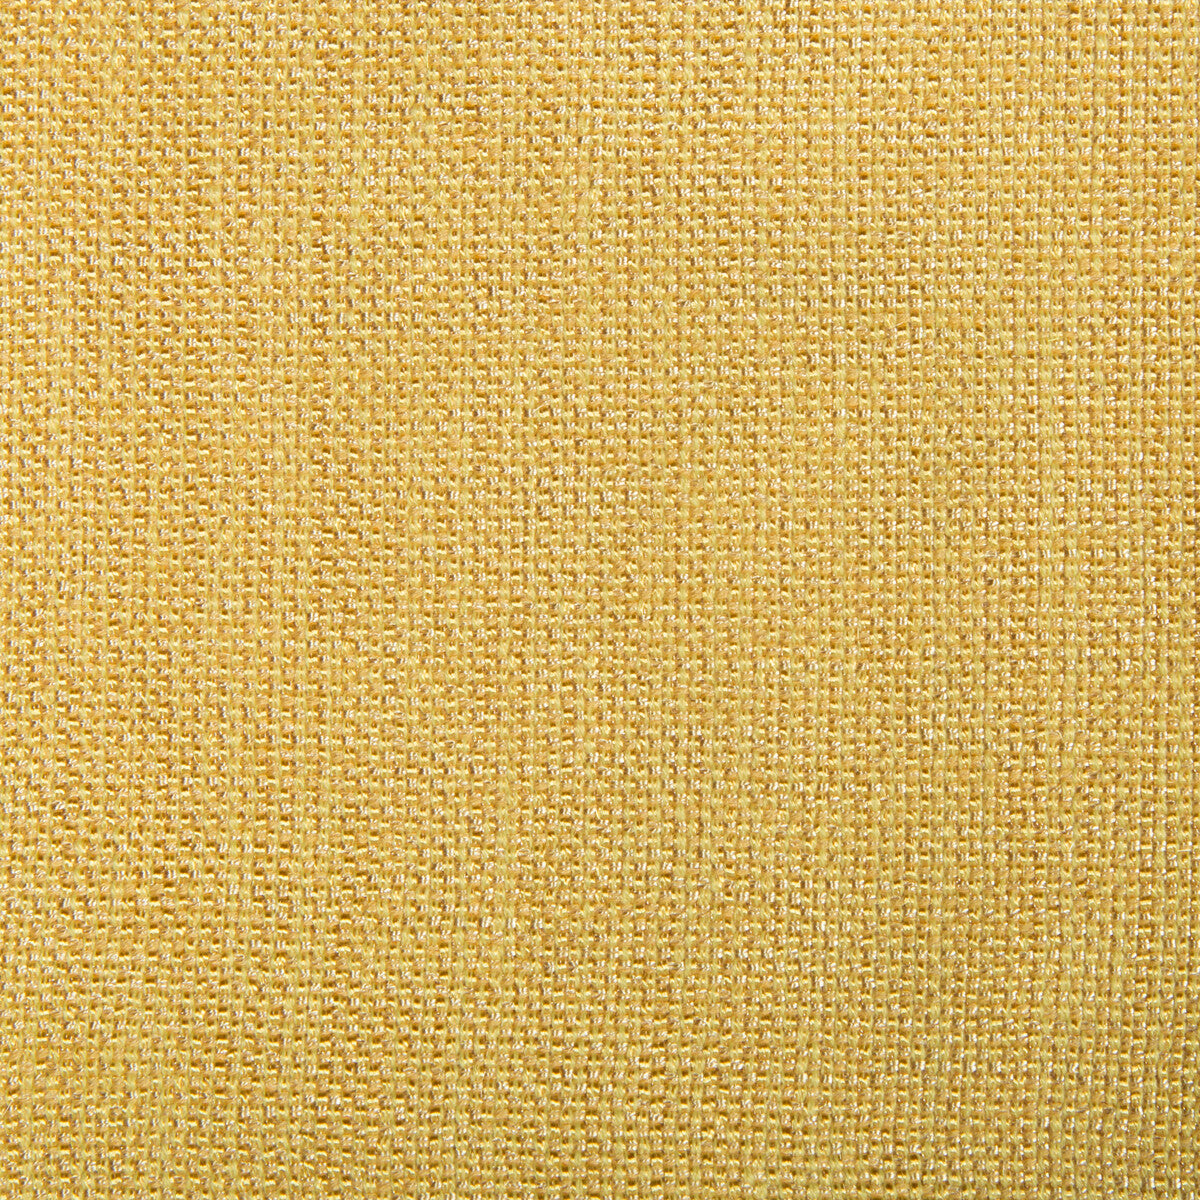 Kravet Contract fabric in 4458-14 color - pattern 4458.14.0 - by Kravet Contract